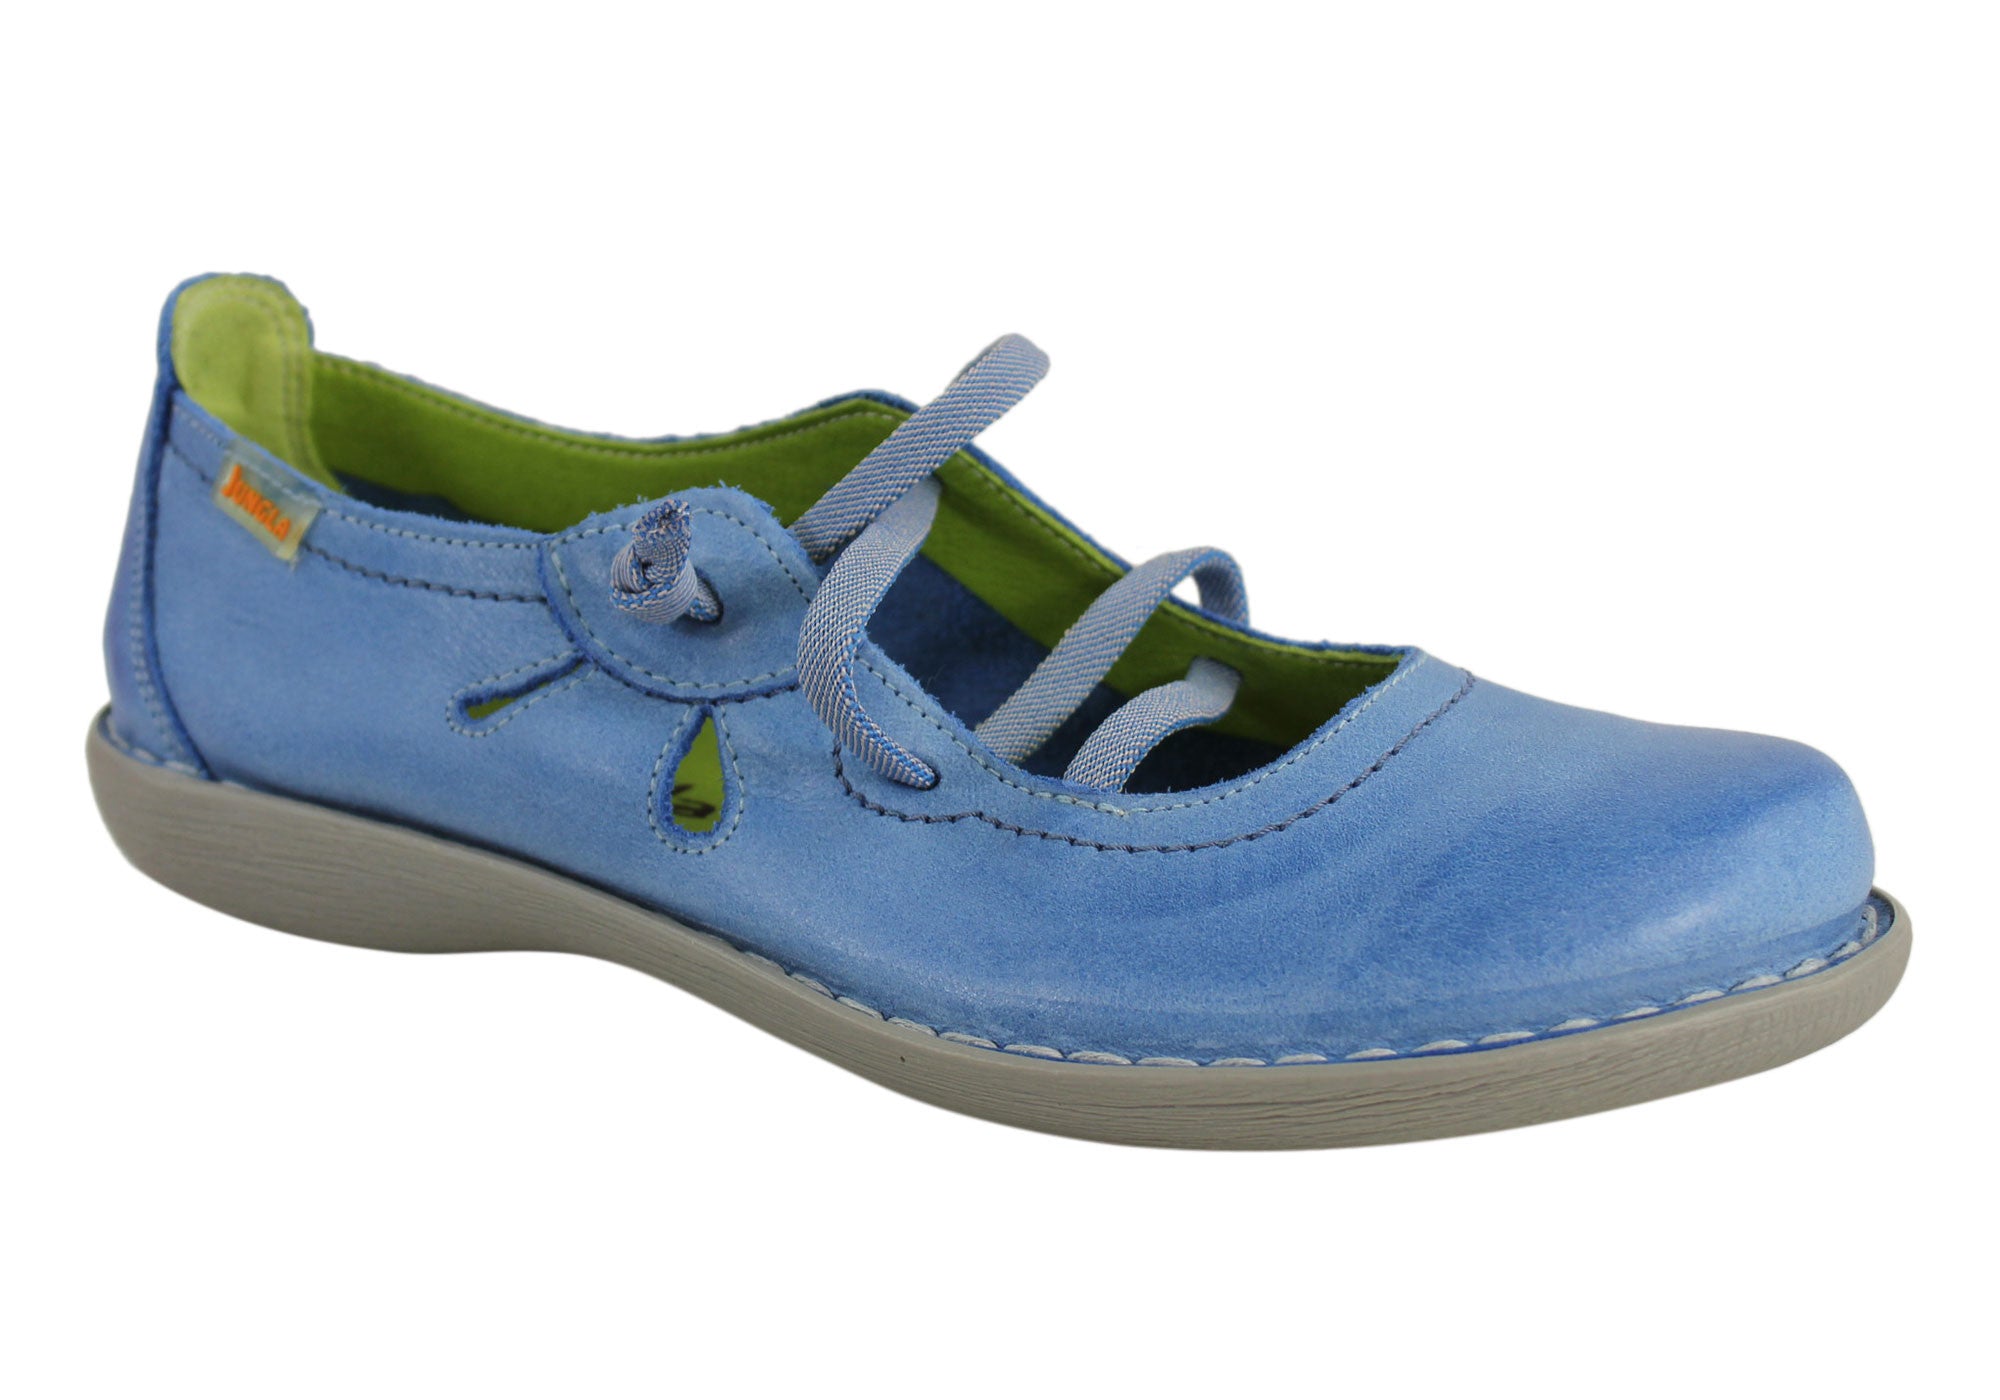 Jungla 5120 Womens Soft Leather Comfortable Shoes Made In Spain